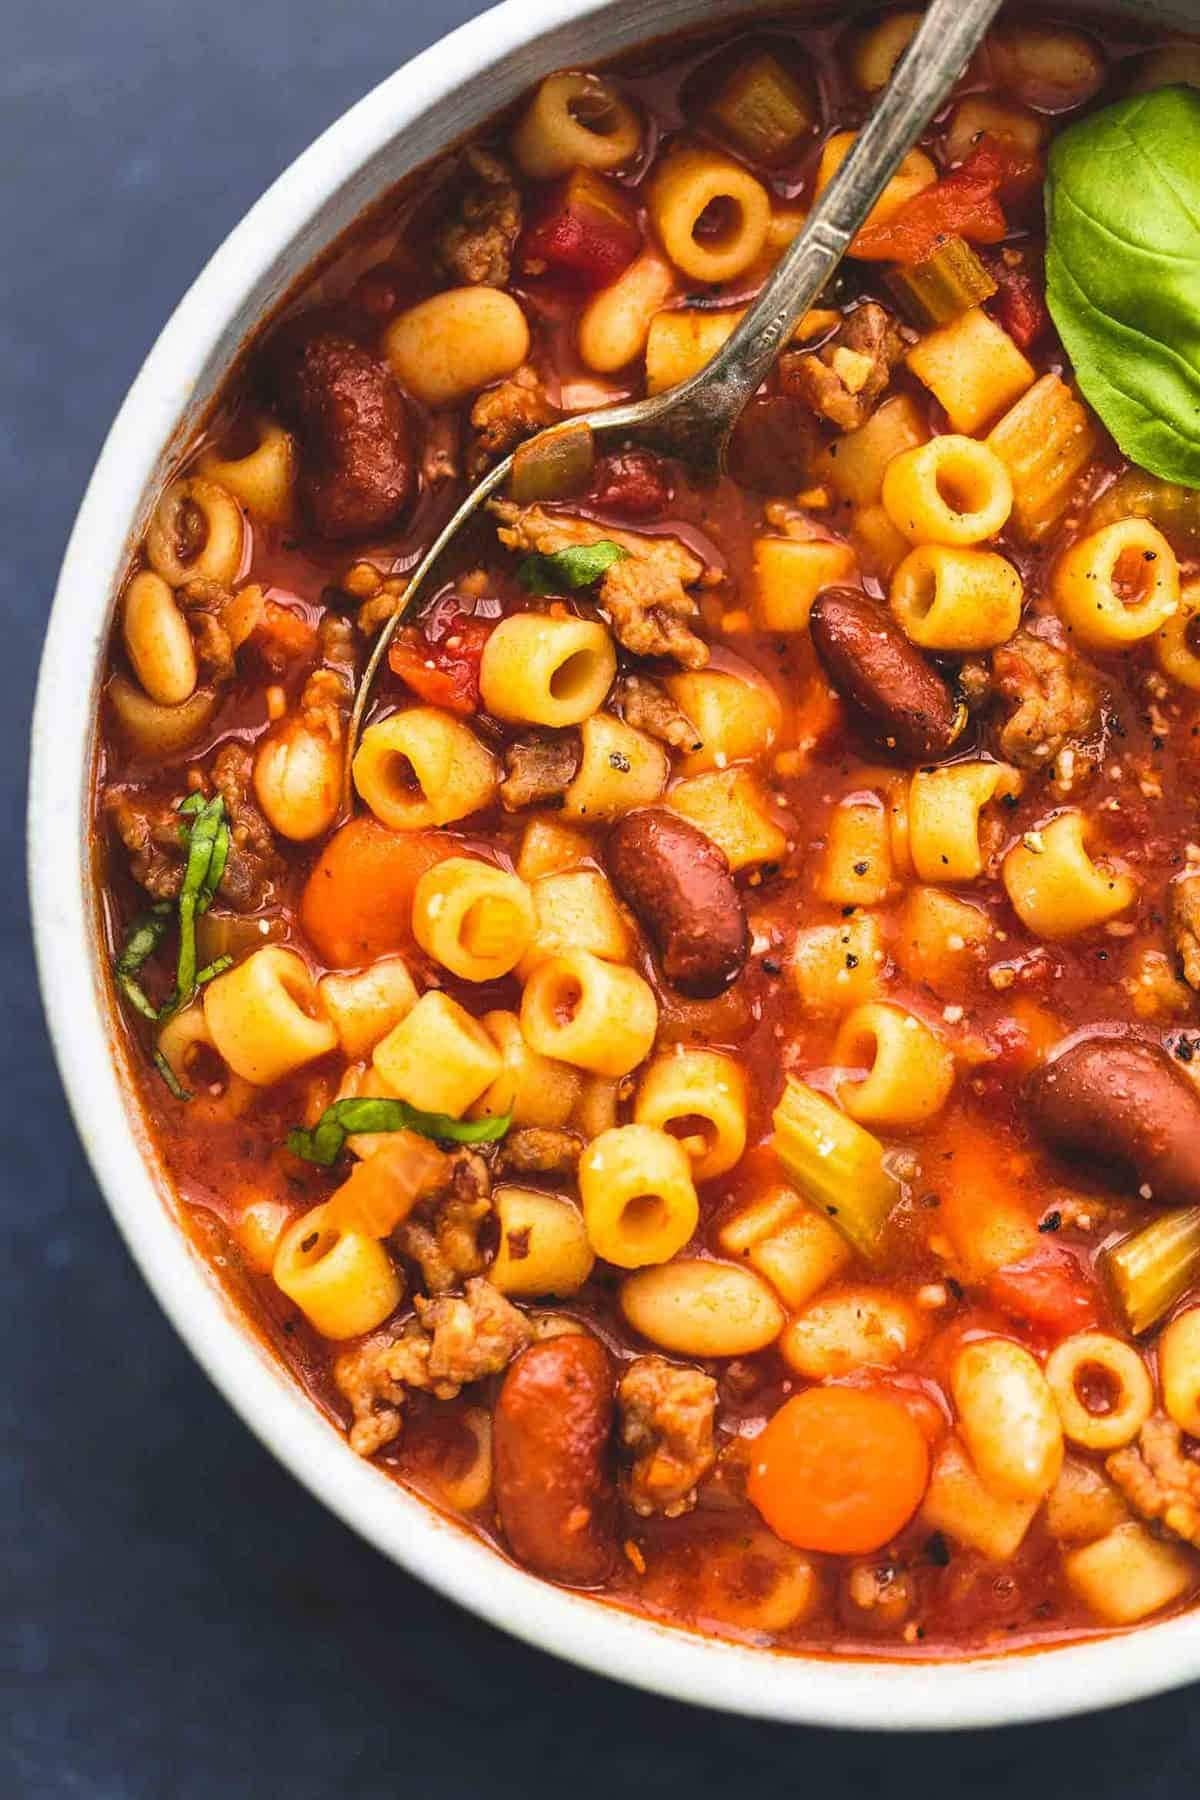 Spoon scooping on a bowl of Instant Pot Pasta e Fagioli Soup with Italian sausage, carrots, diced tomatoes, ditalini pasta, navy and red kidney beans